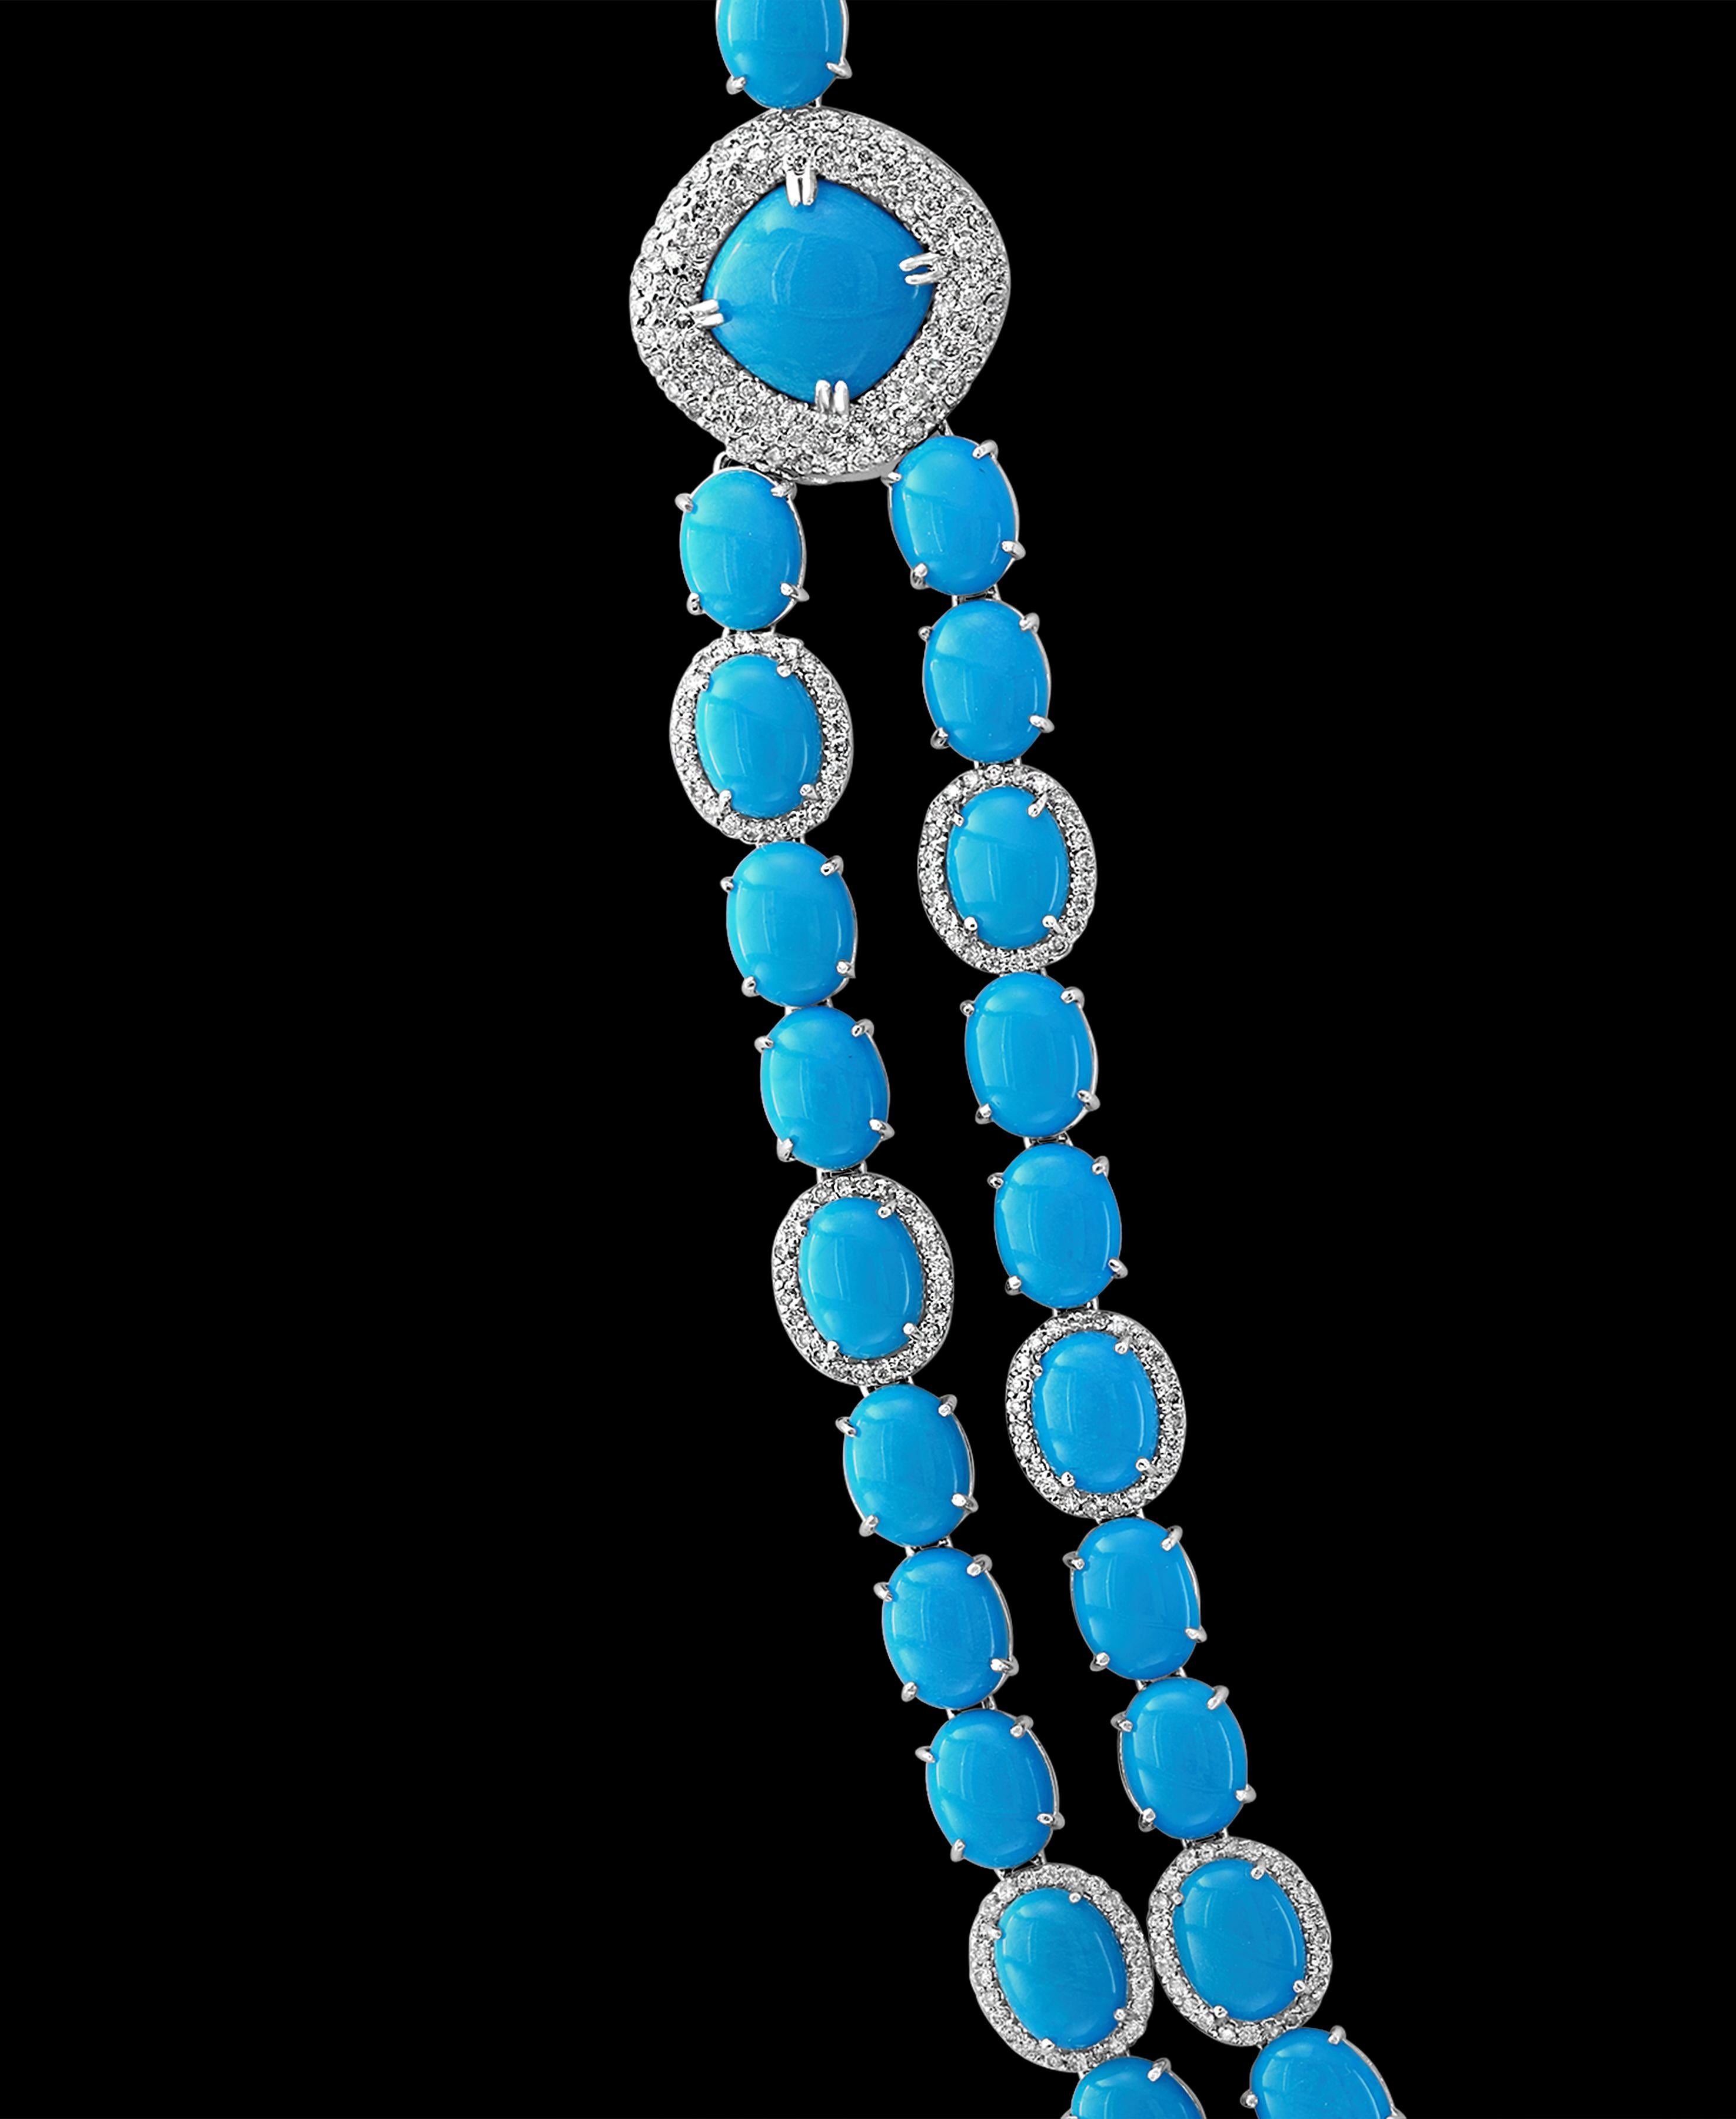 Women's 104 Carat Sleeping Beauty Turquoise Necklace and Earring Set, Bridal, 18 K Gold For Sale